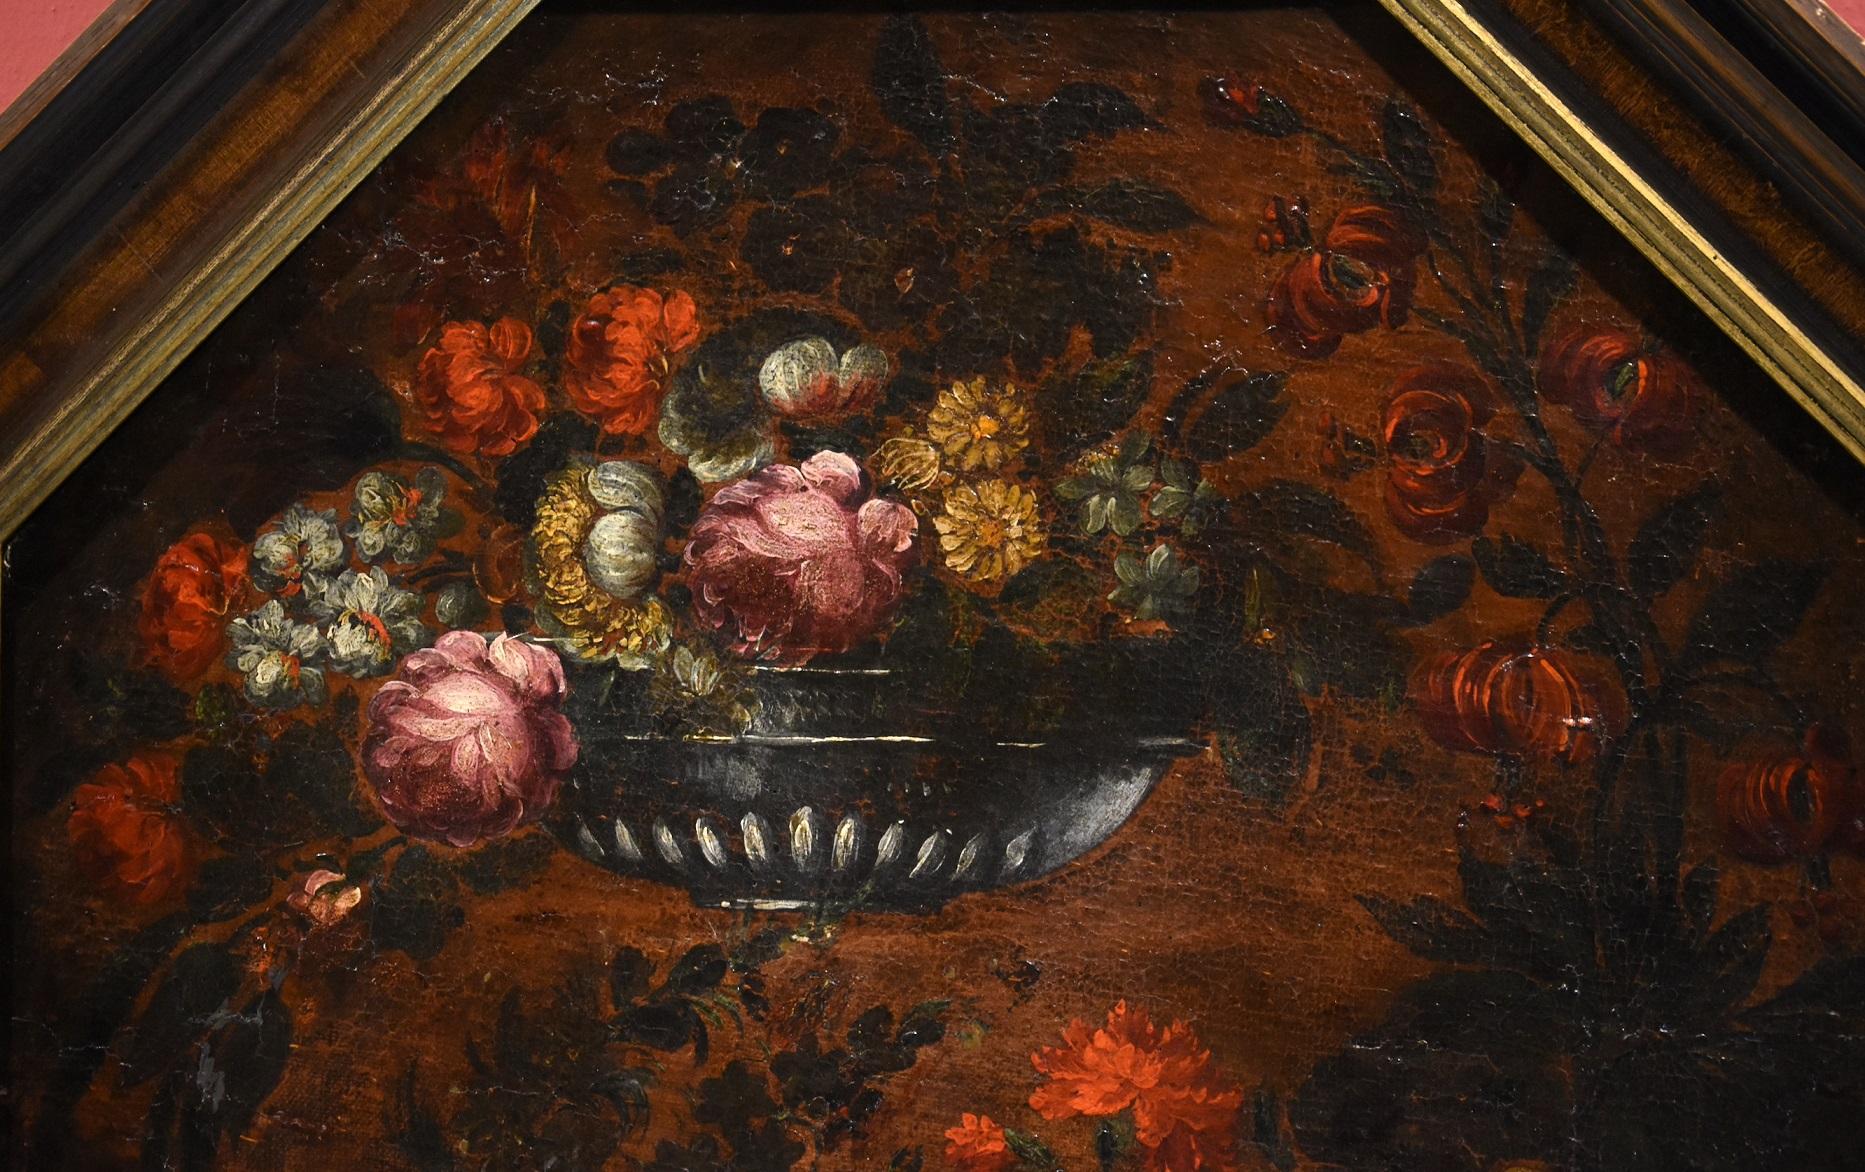 Francesca Volò Smiller, called Vincenzina (Milan, 1657 - 1700) - circle of
Floral composition

Oil on canvas (97 x 72 cm. - in octagonal frame 100 x 84 cm.)

A rich floral composition, arranged with a meditated casualness on two planes at different